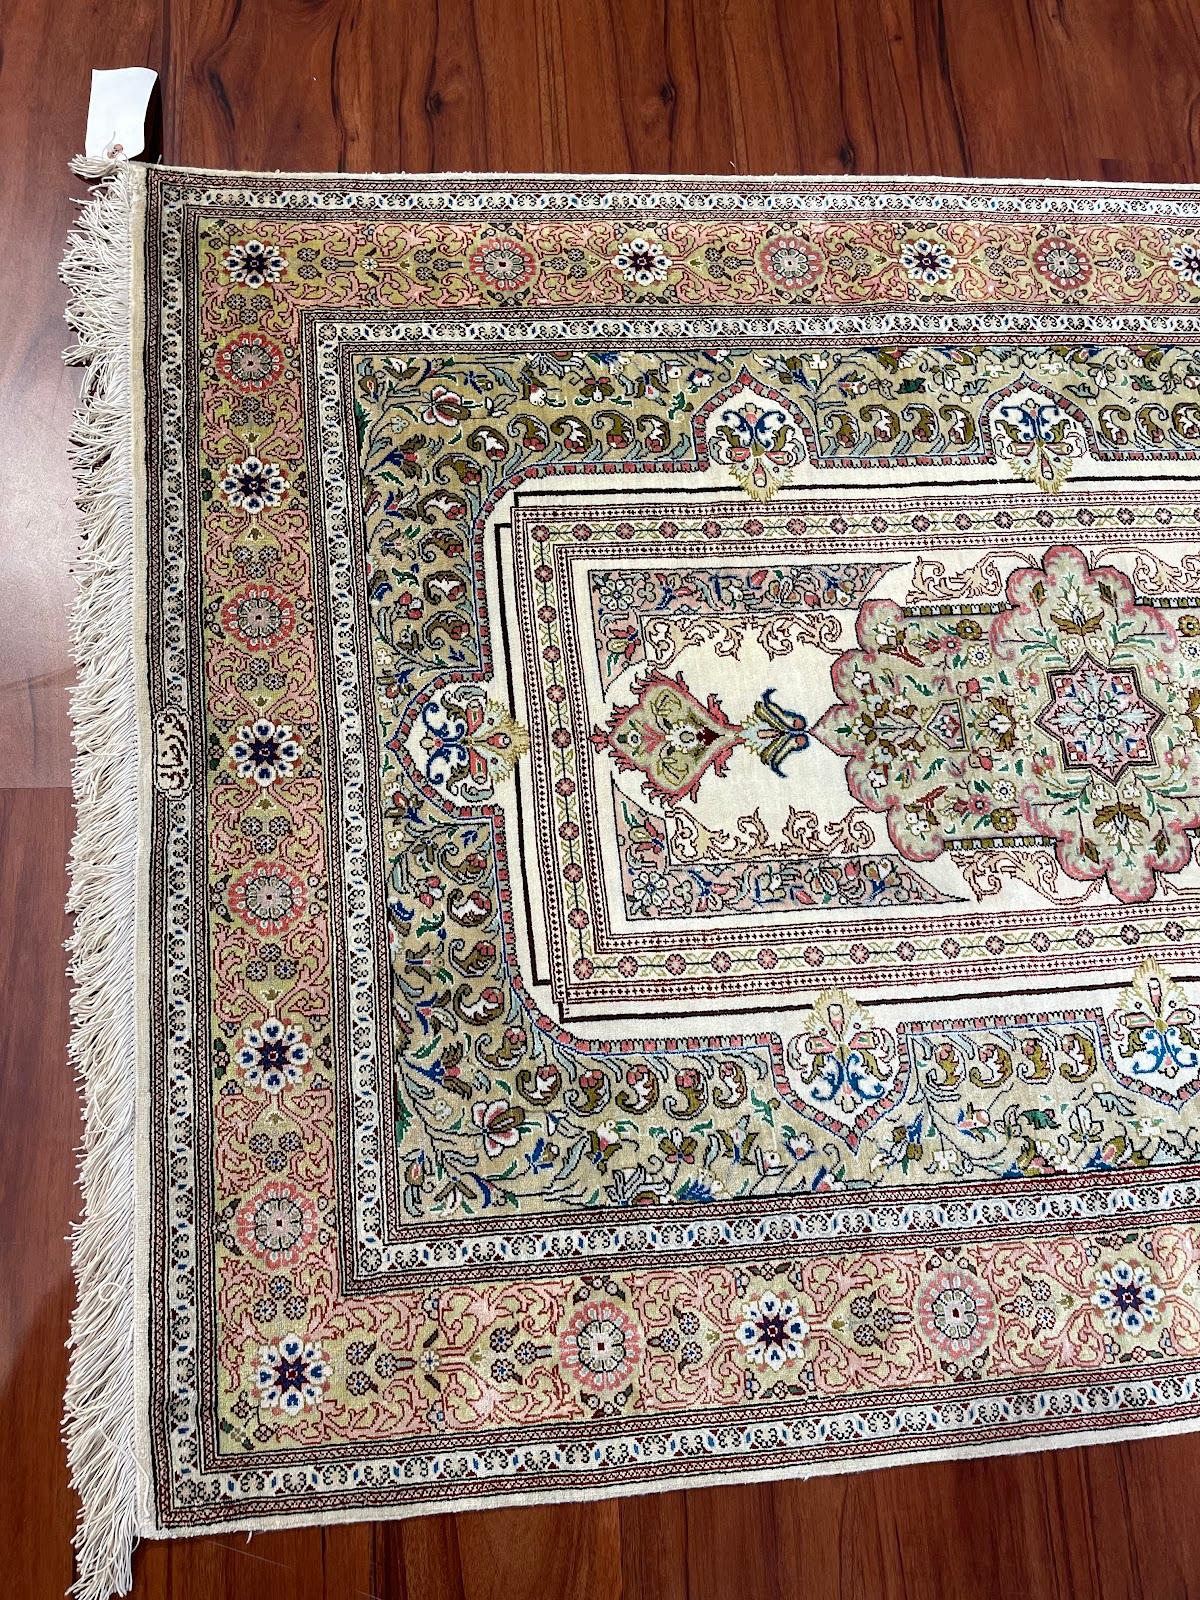 This is a Persian Silk Qum rug originated from iran. The Material is 100% silk. The Dimensions are 3’0”X 5’0” ft. Condition of the item is Excellent. Circa (Date of manufacture) 20th century.